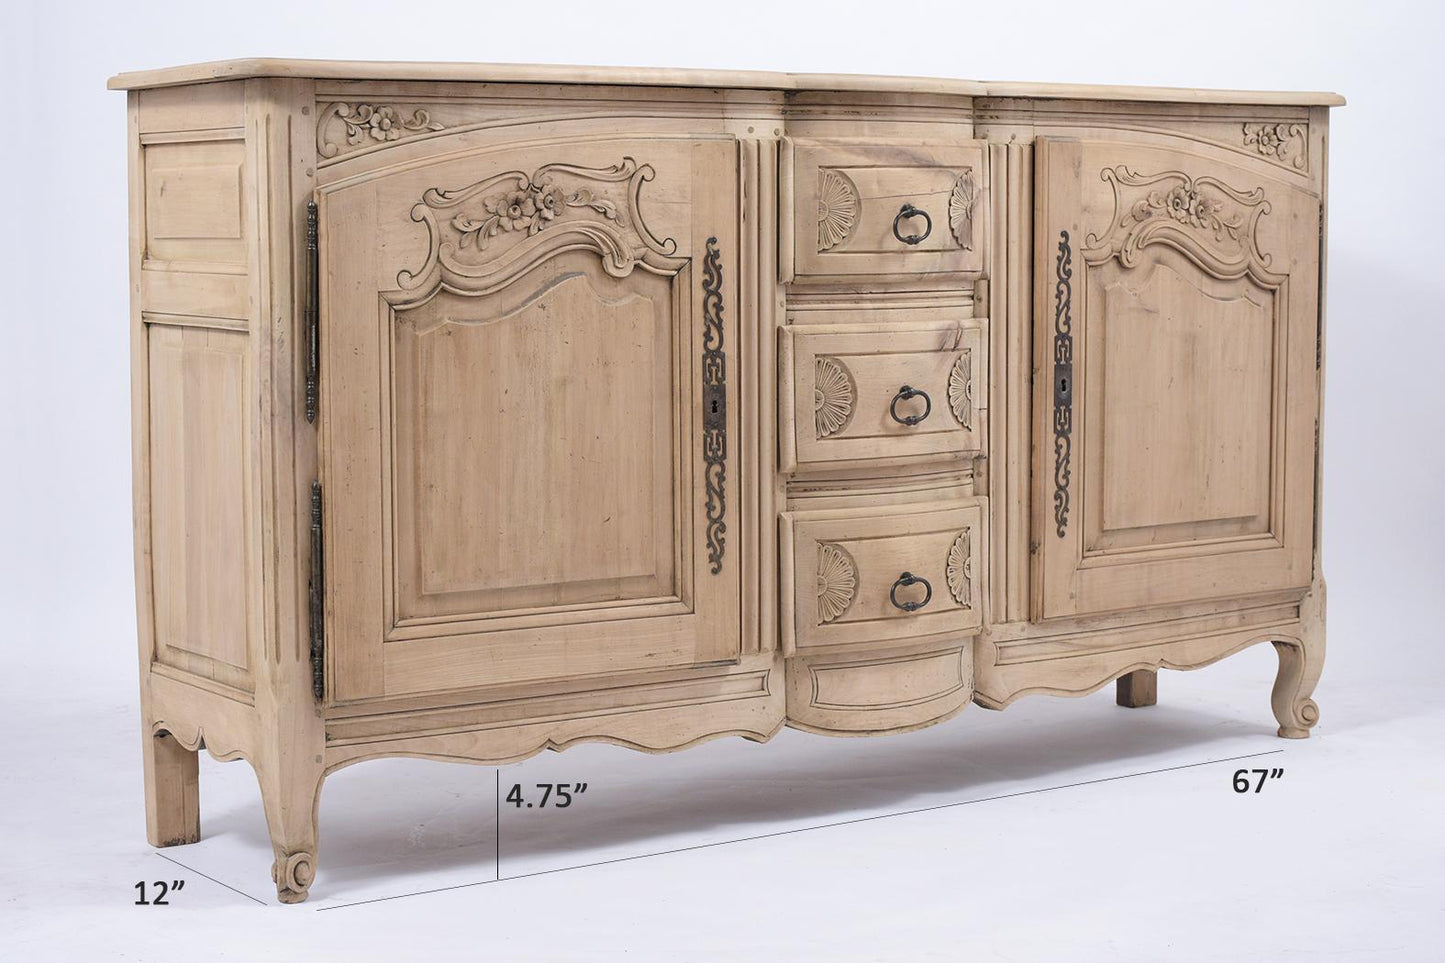 19th Century Louis XV Walnut Buffet with Hand-Carved Details and Iron Accents